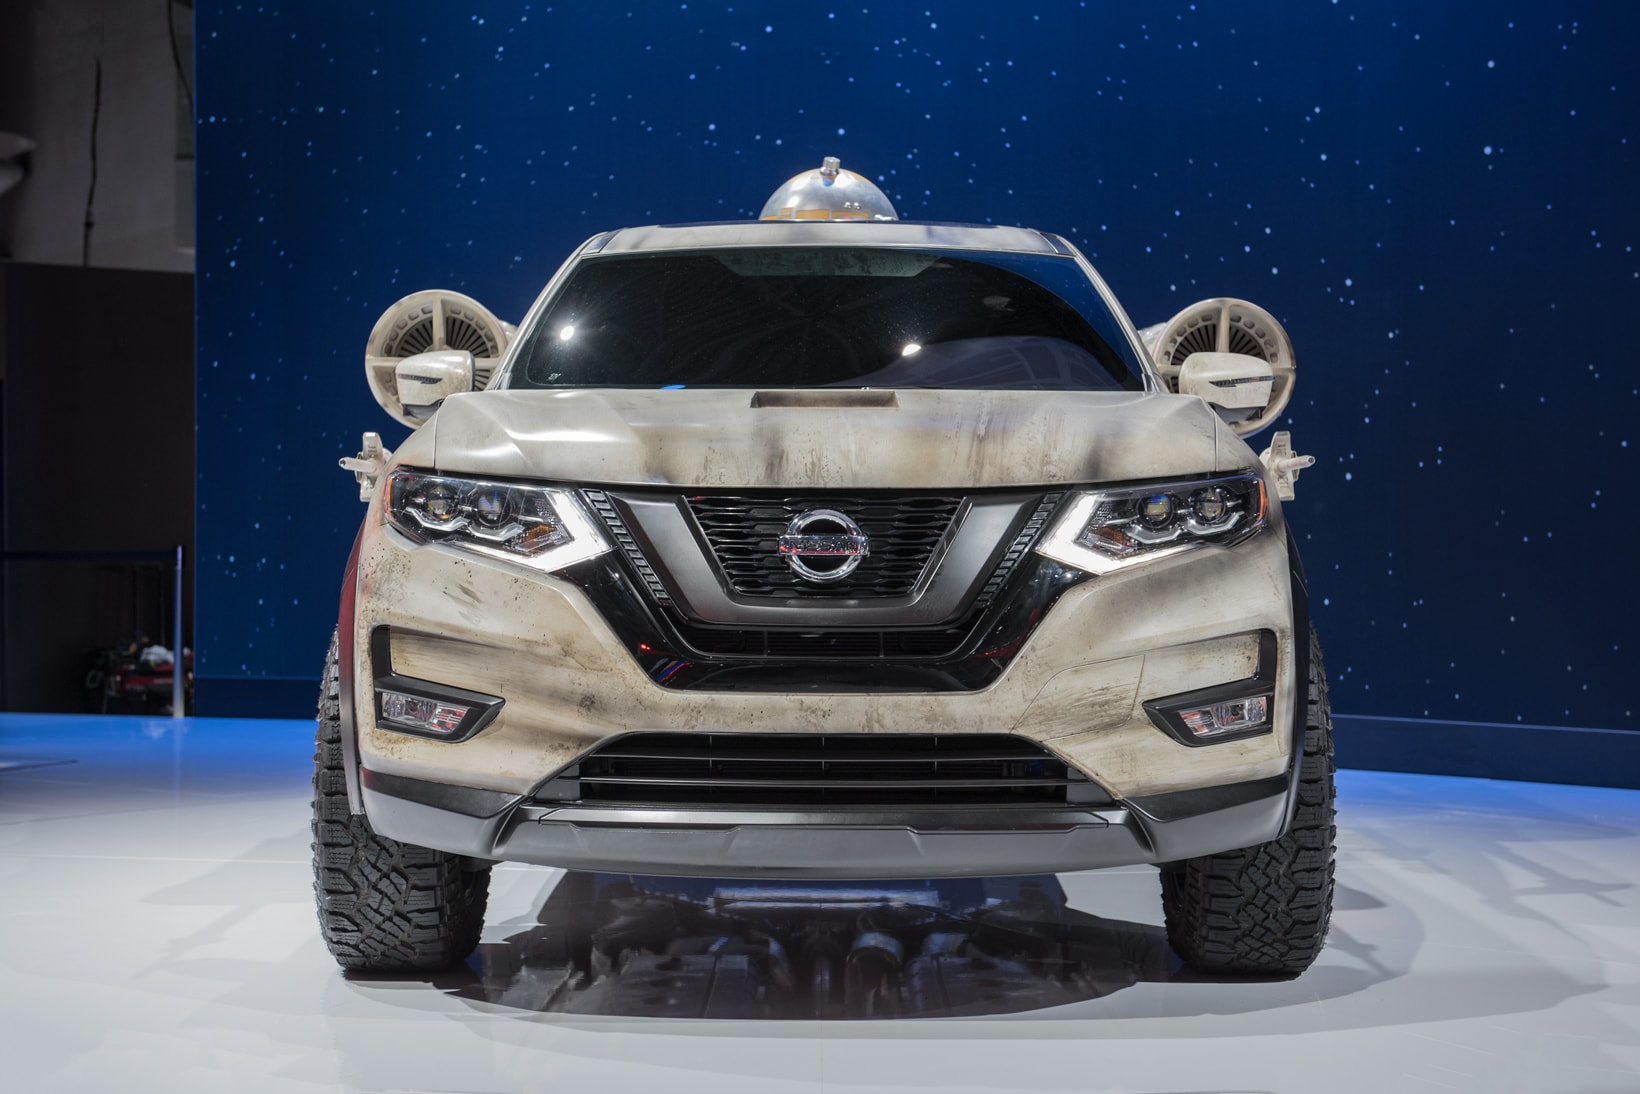 2017 Nissan Rogue: 'Rogue One Star Wars' Limited Edition